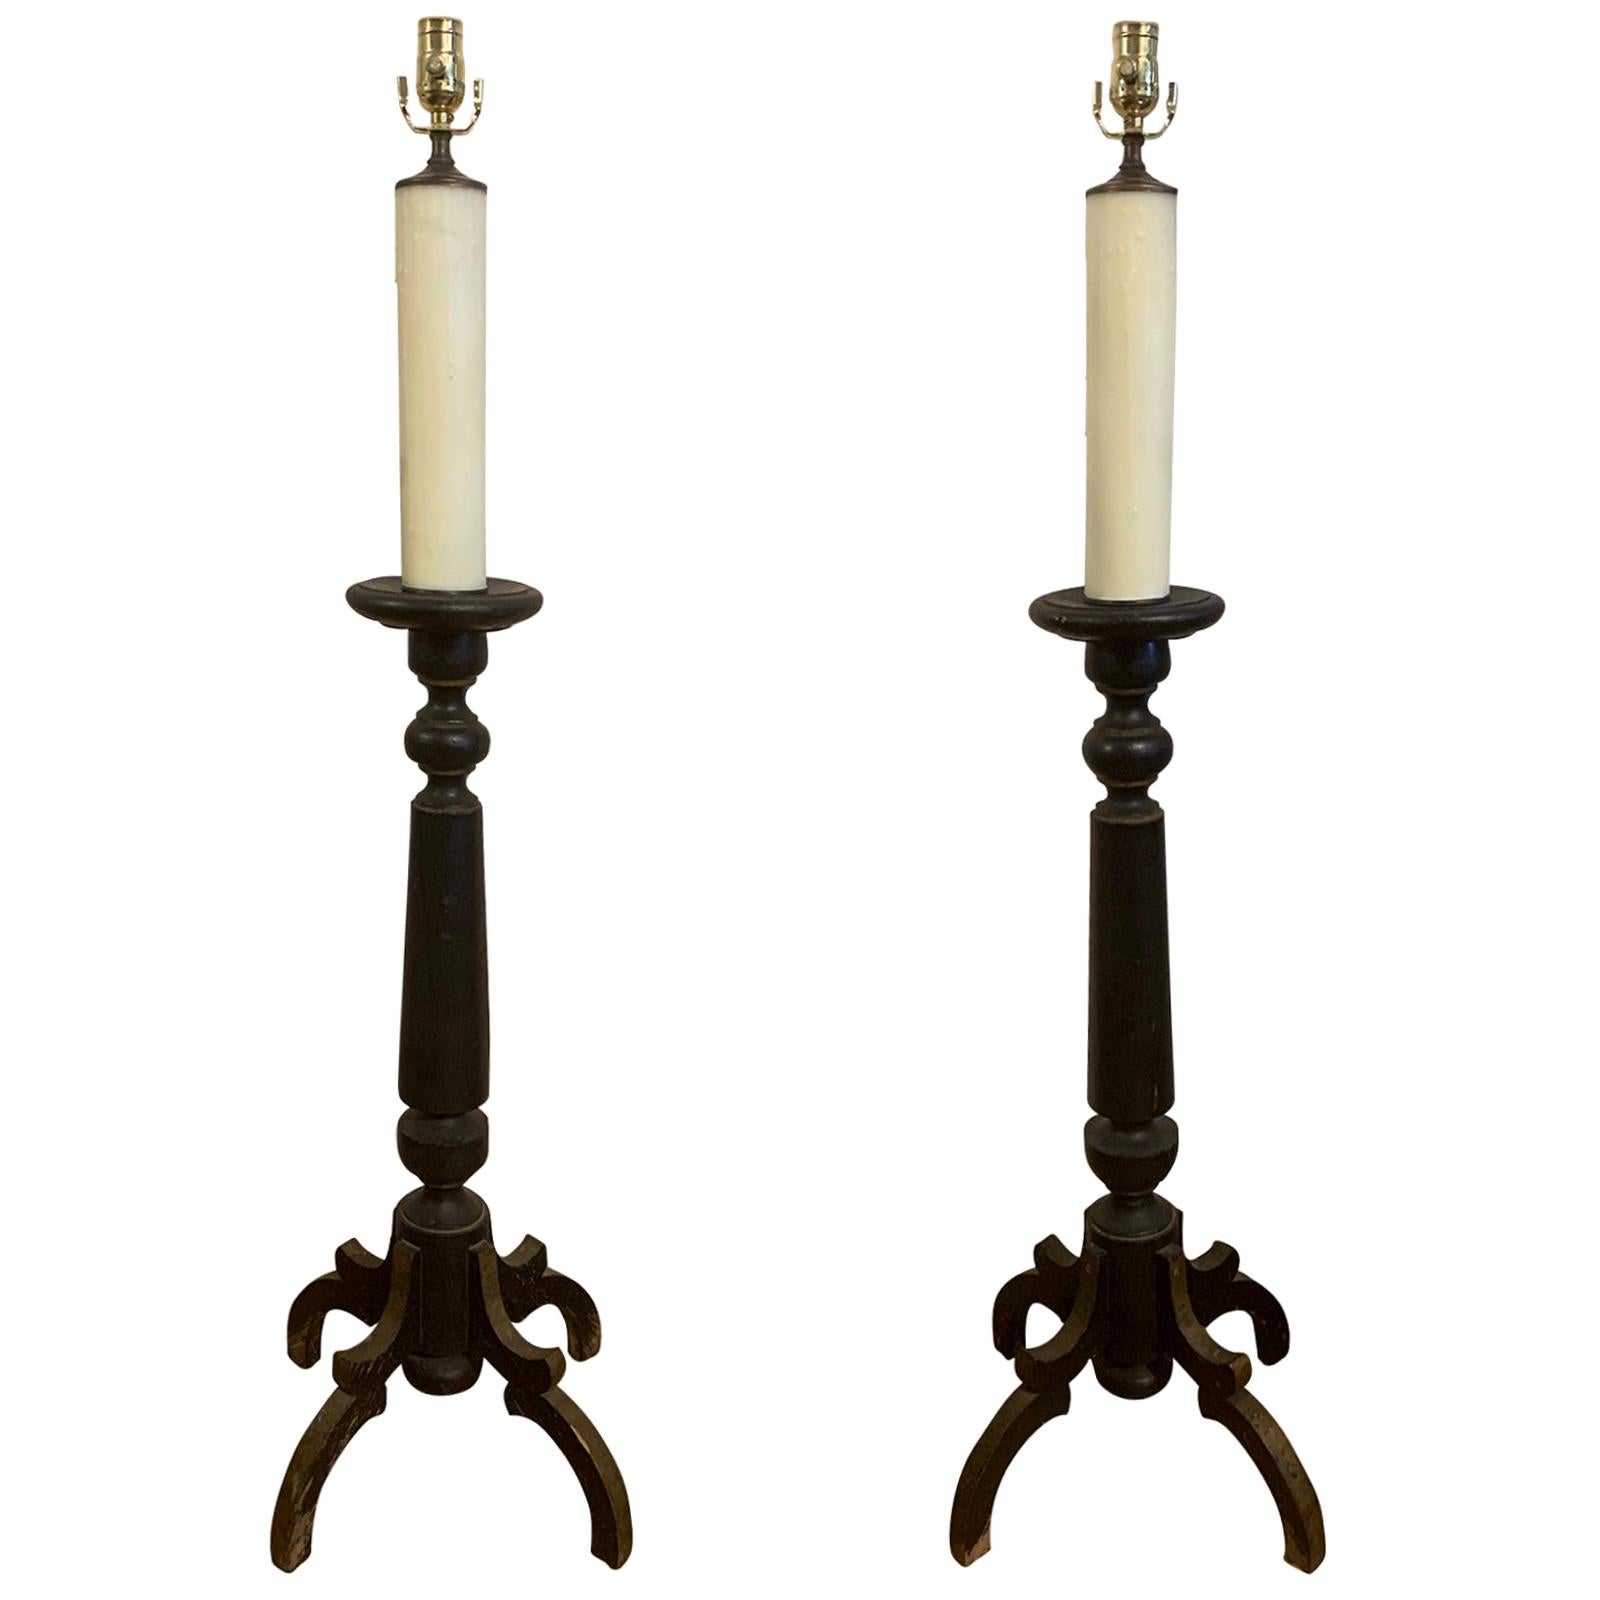 Pair of 19th-20th Century Continental Black Painted Wood Prickets as Floor Lamps